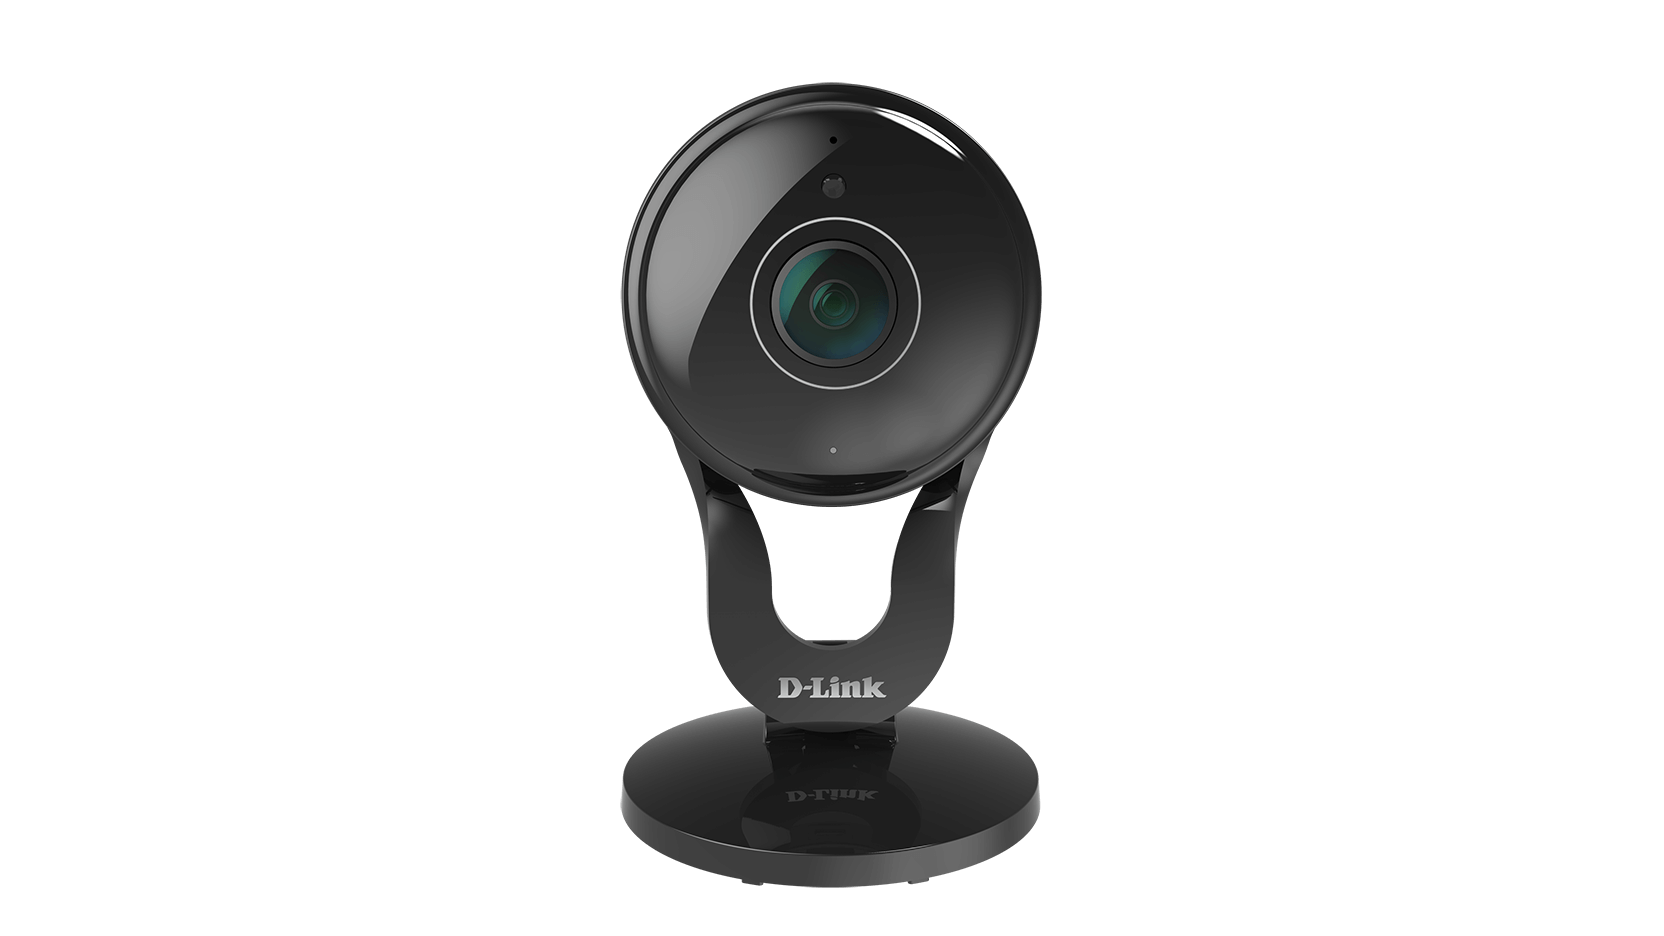 D-Link DCS-2530L 180-Degree Day /& Night WiFi Wireless Security Camera 1080P